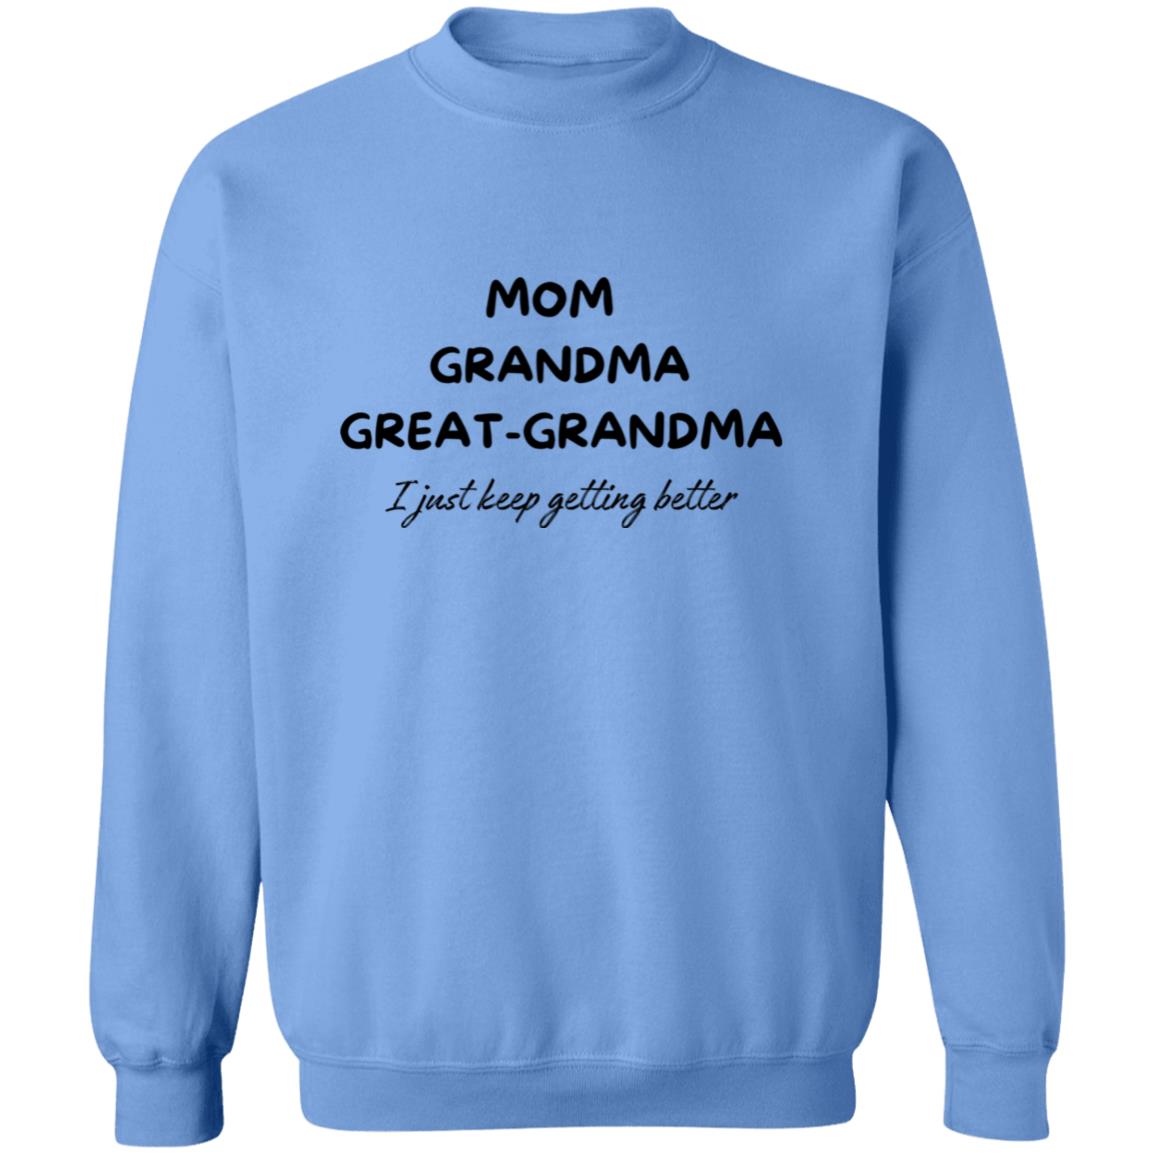 Get trendy with Mom Grandma, Great-grandma I Just Keep Getting Better Crewneck Sweatshirt - Sweatshirts available at Good Gift Company. Grab yours for $24.95 today!